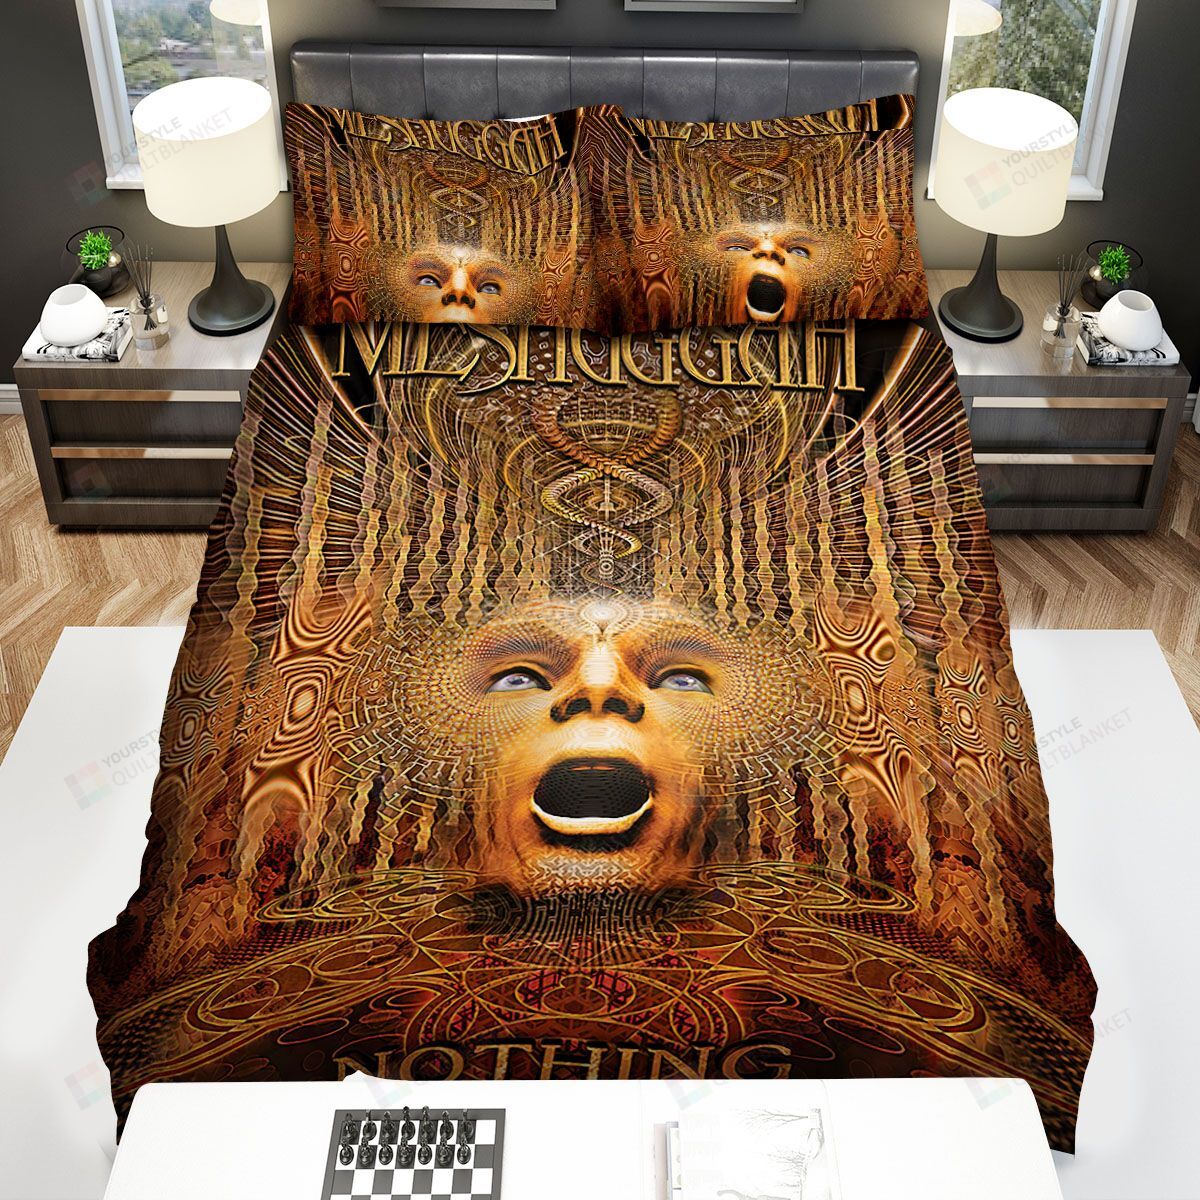 Meshuggah Music Band Nothing Album Cover Bed Sheets Spread Comforter Duvet Cover Bedding Sets